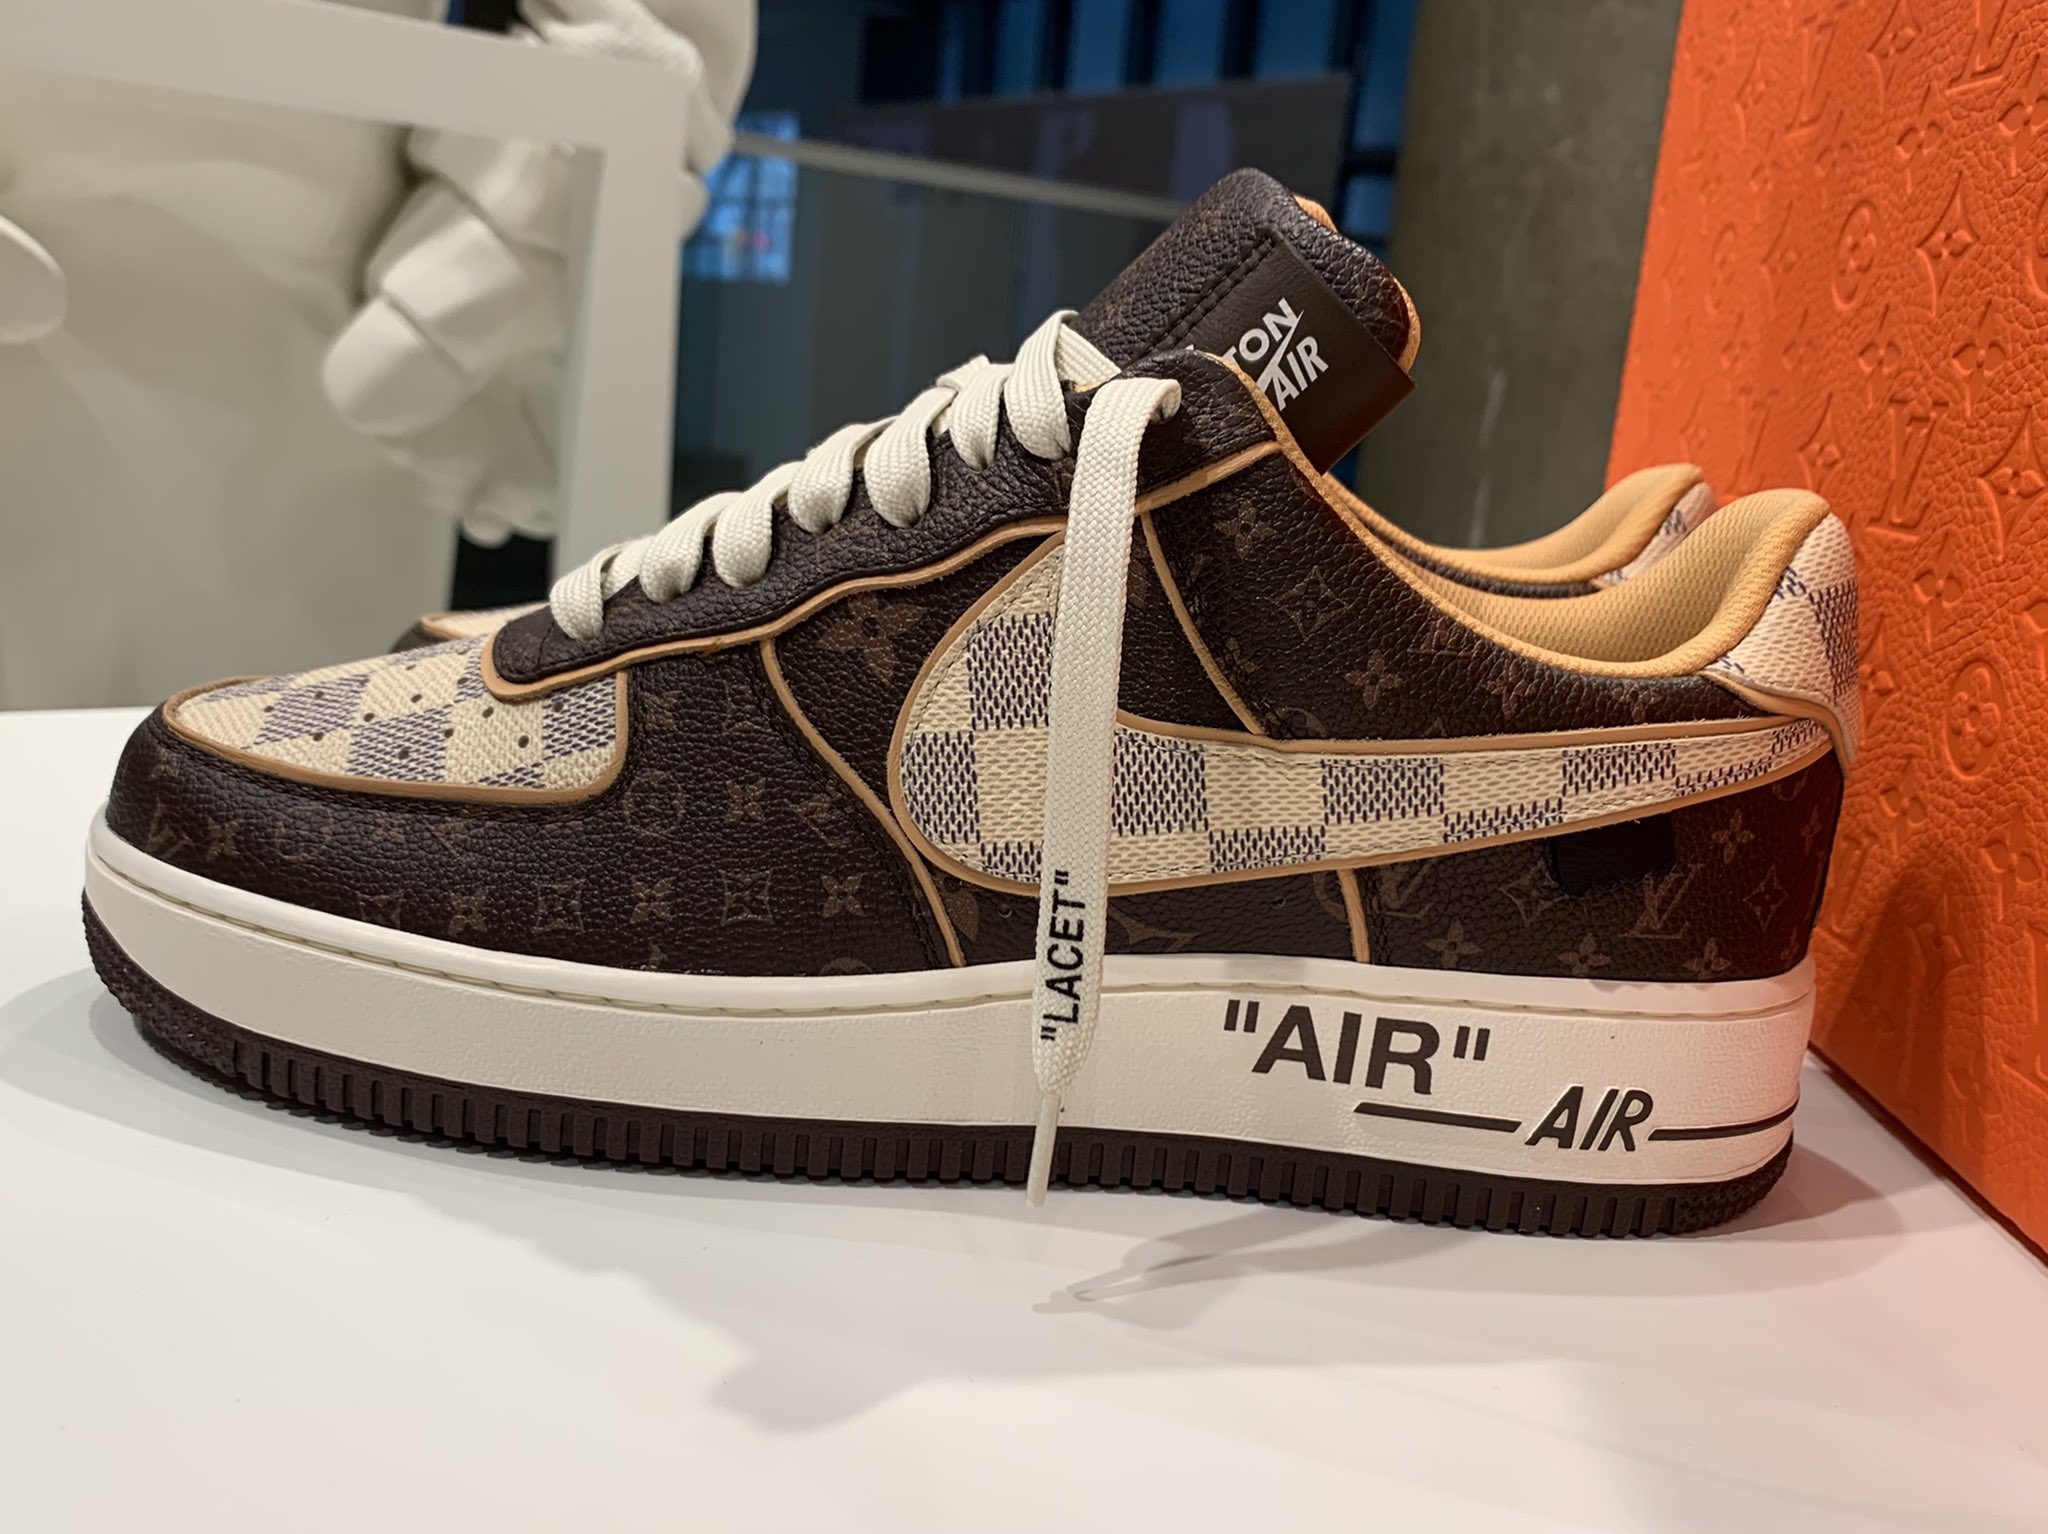 brendandunne on X: Louis Vuitton x Nike Air Force 1 launch to begin  exclusively via Sotheby's auction on Jan. 26. Bidding starts at $2,000.   / X